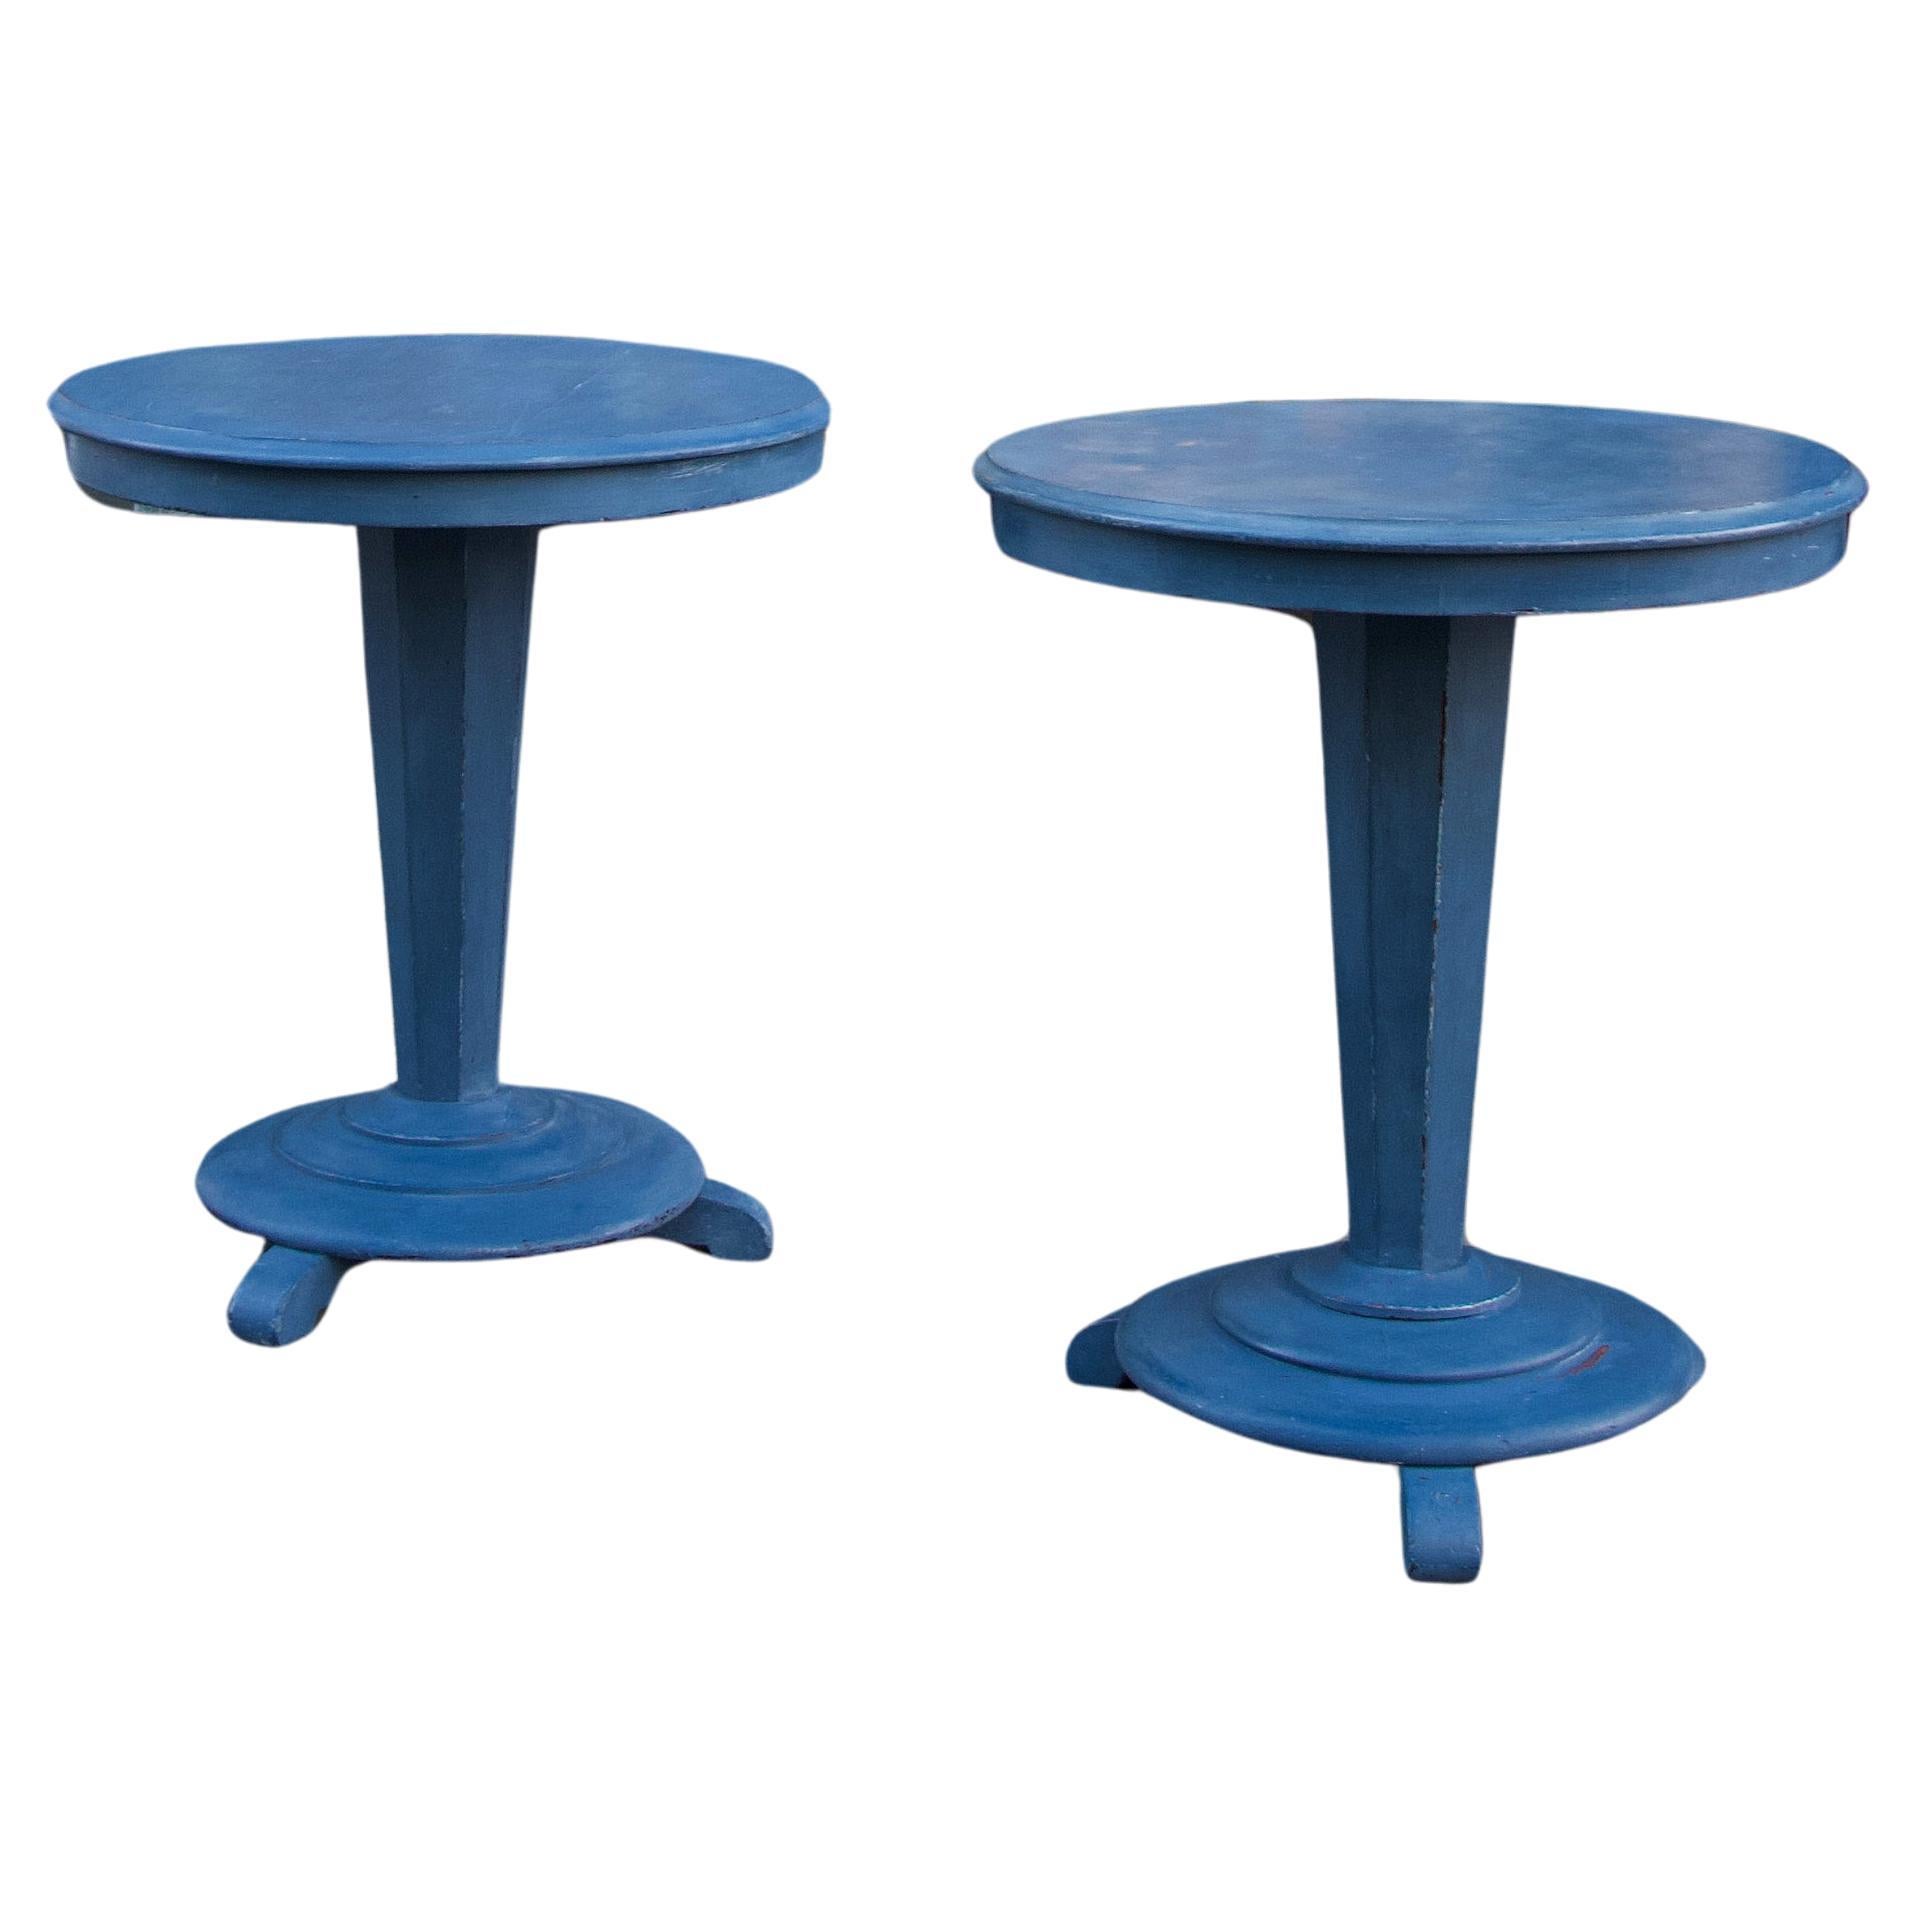 Mahogany Side Tables, Sweden, 19th century For Sale